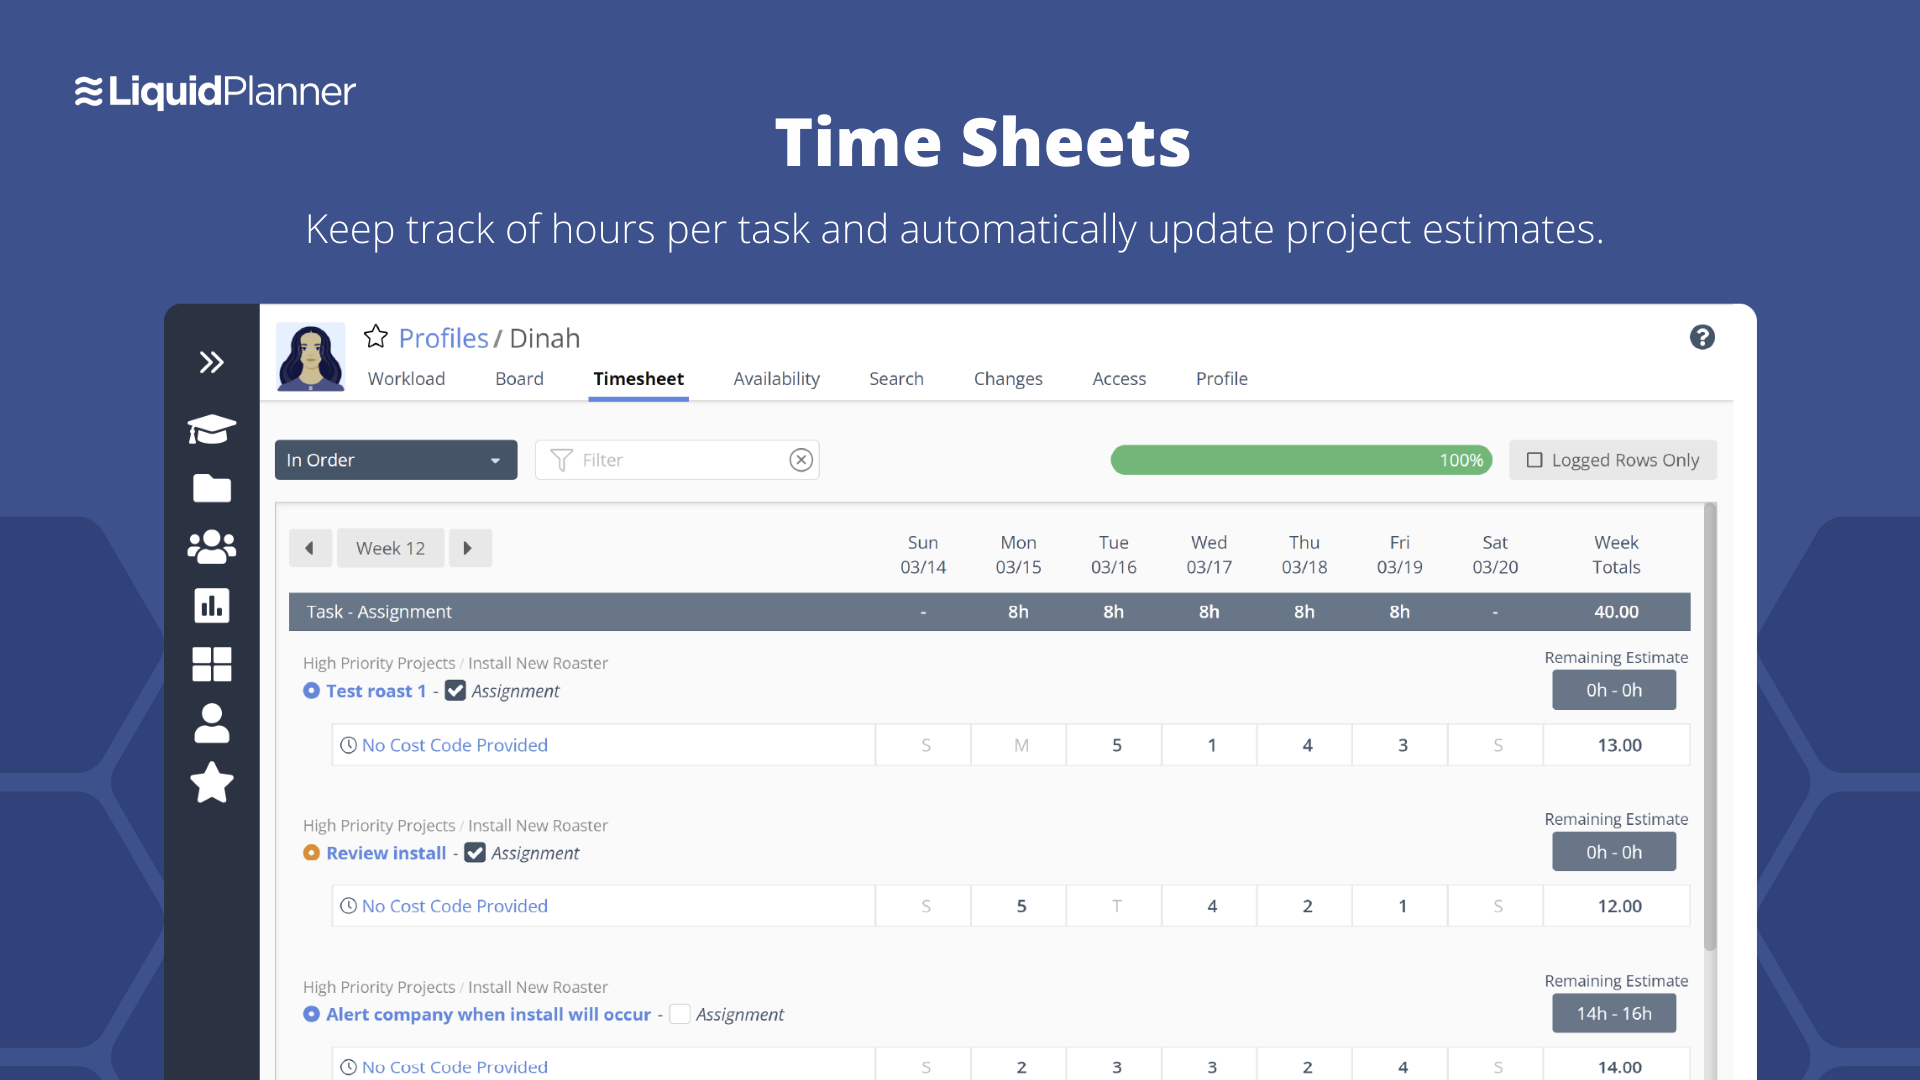 Time Sheets allow you to track how many hours are spent on tasks and projects, to have deeper insights into where time is spent. Time tracking allows more efficient collaboration with your team to make the most of your team's time and resources.